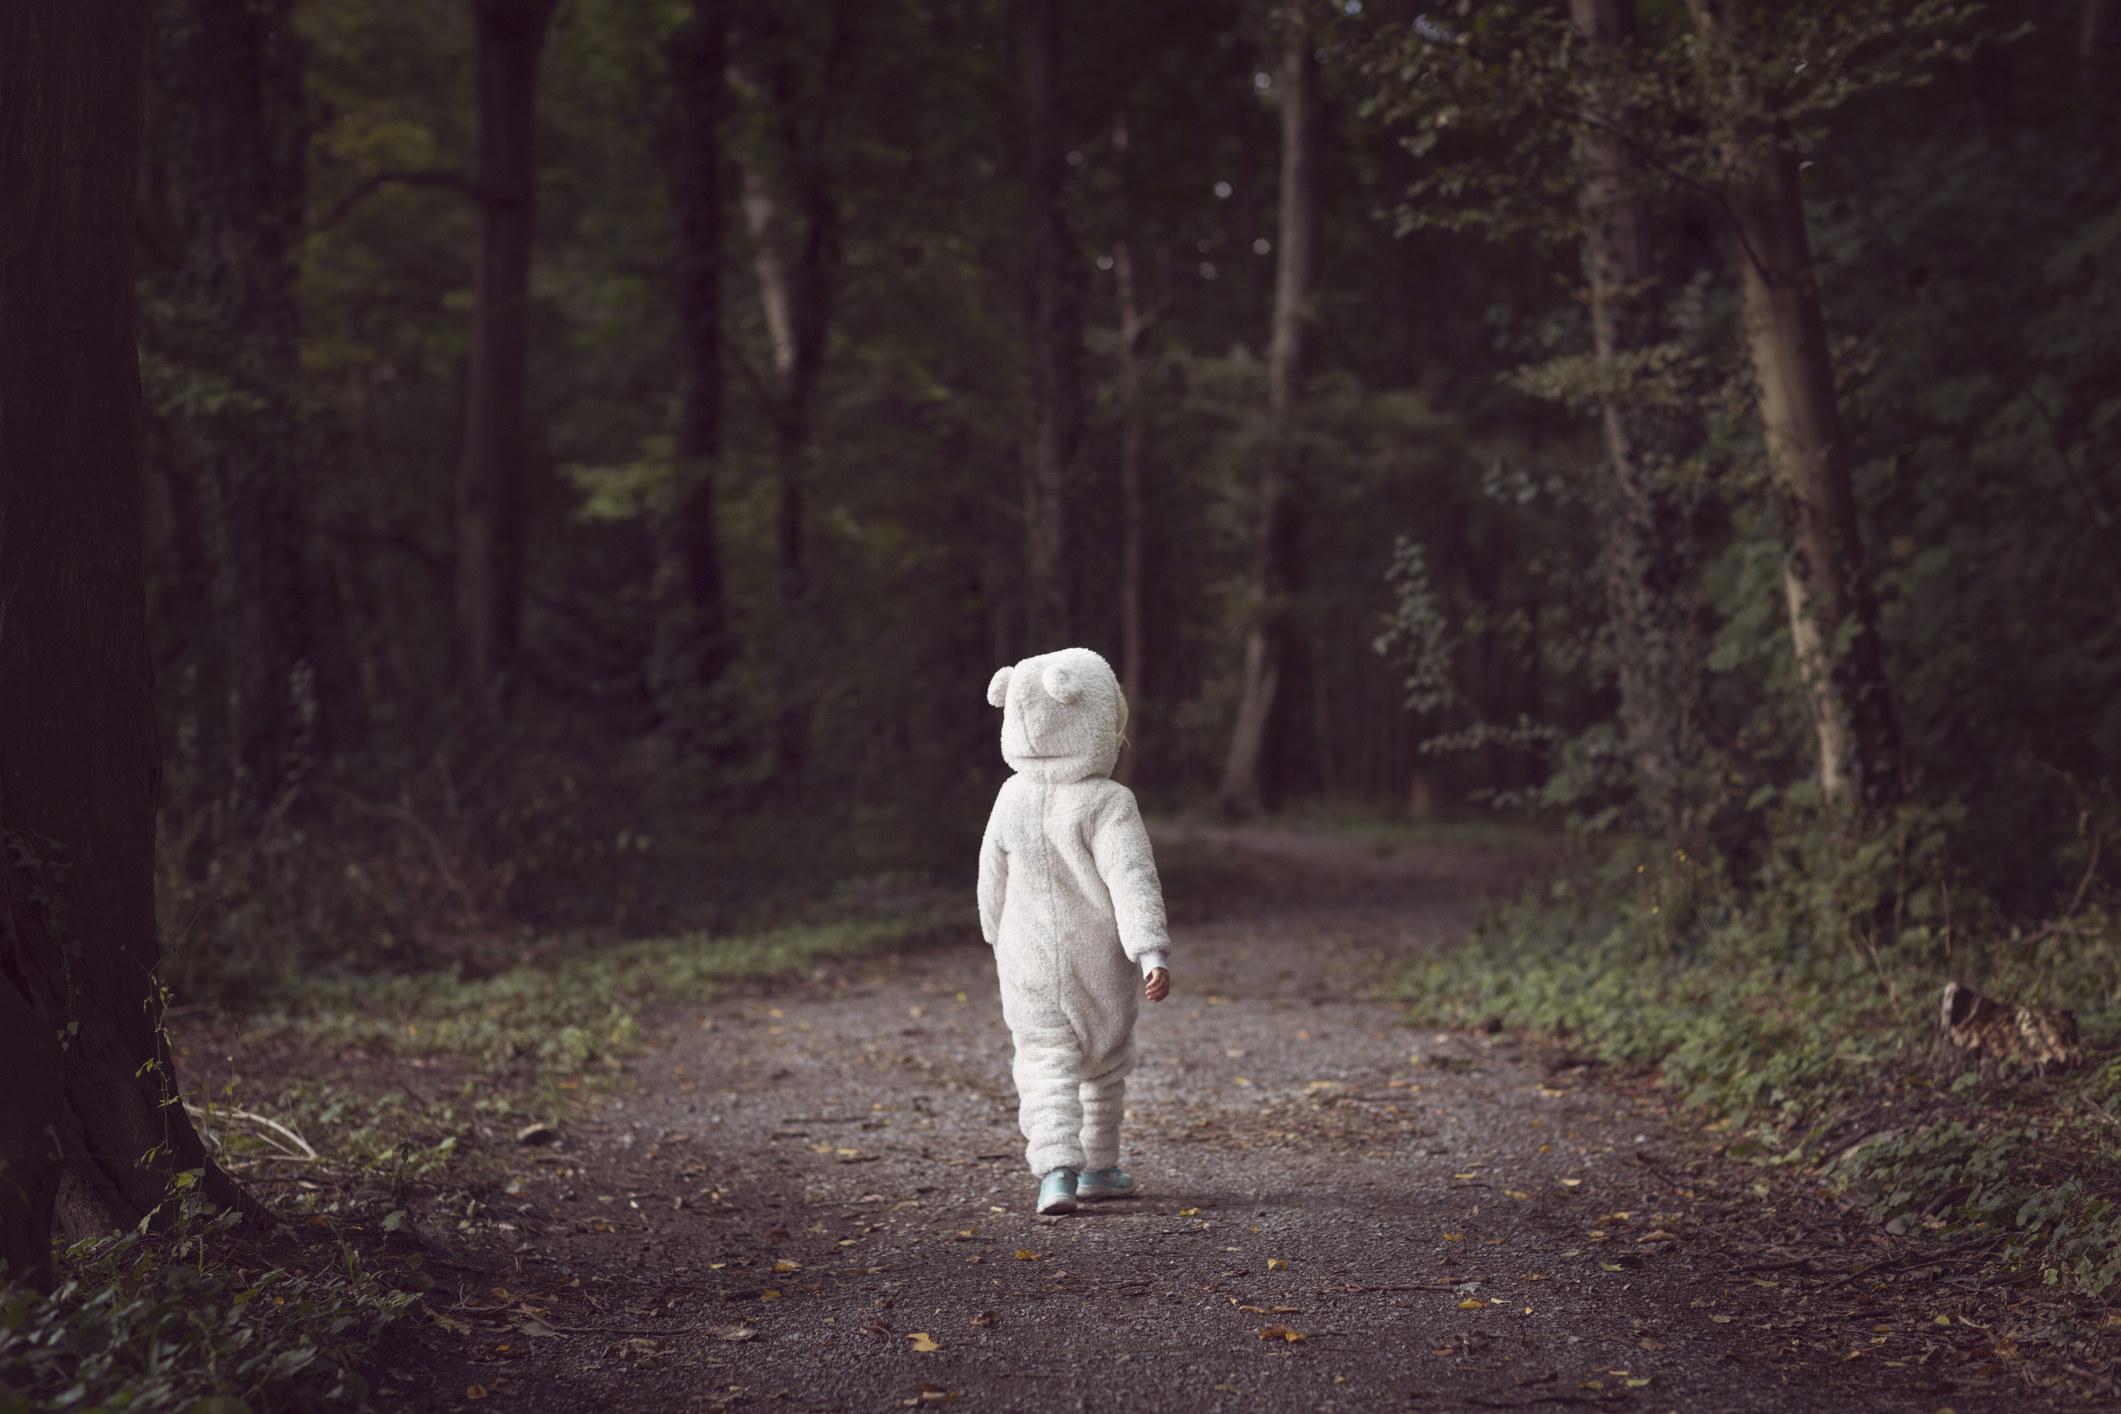 A child in a costume walking in the woods